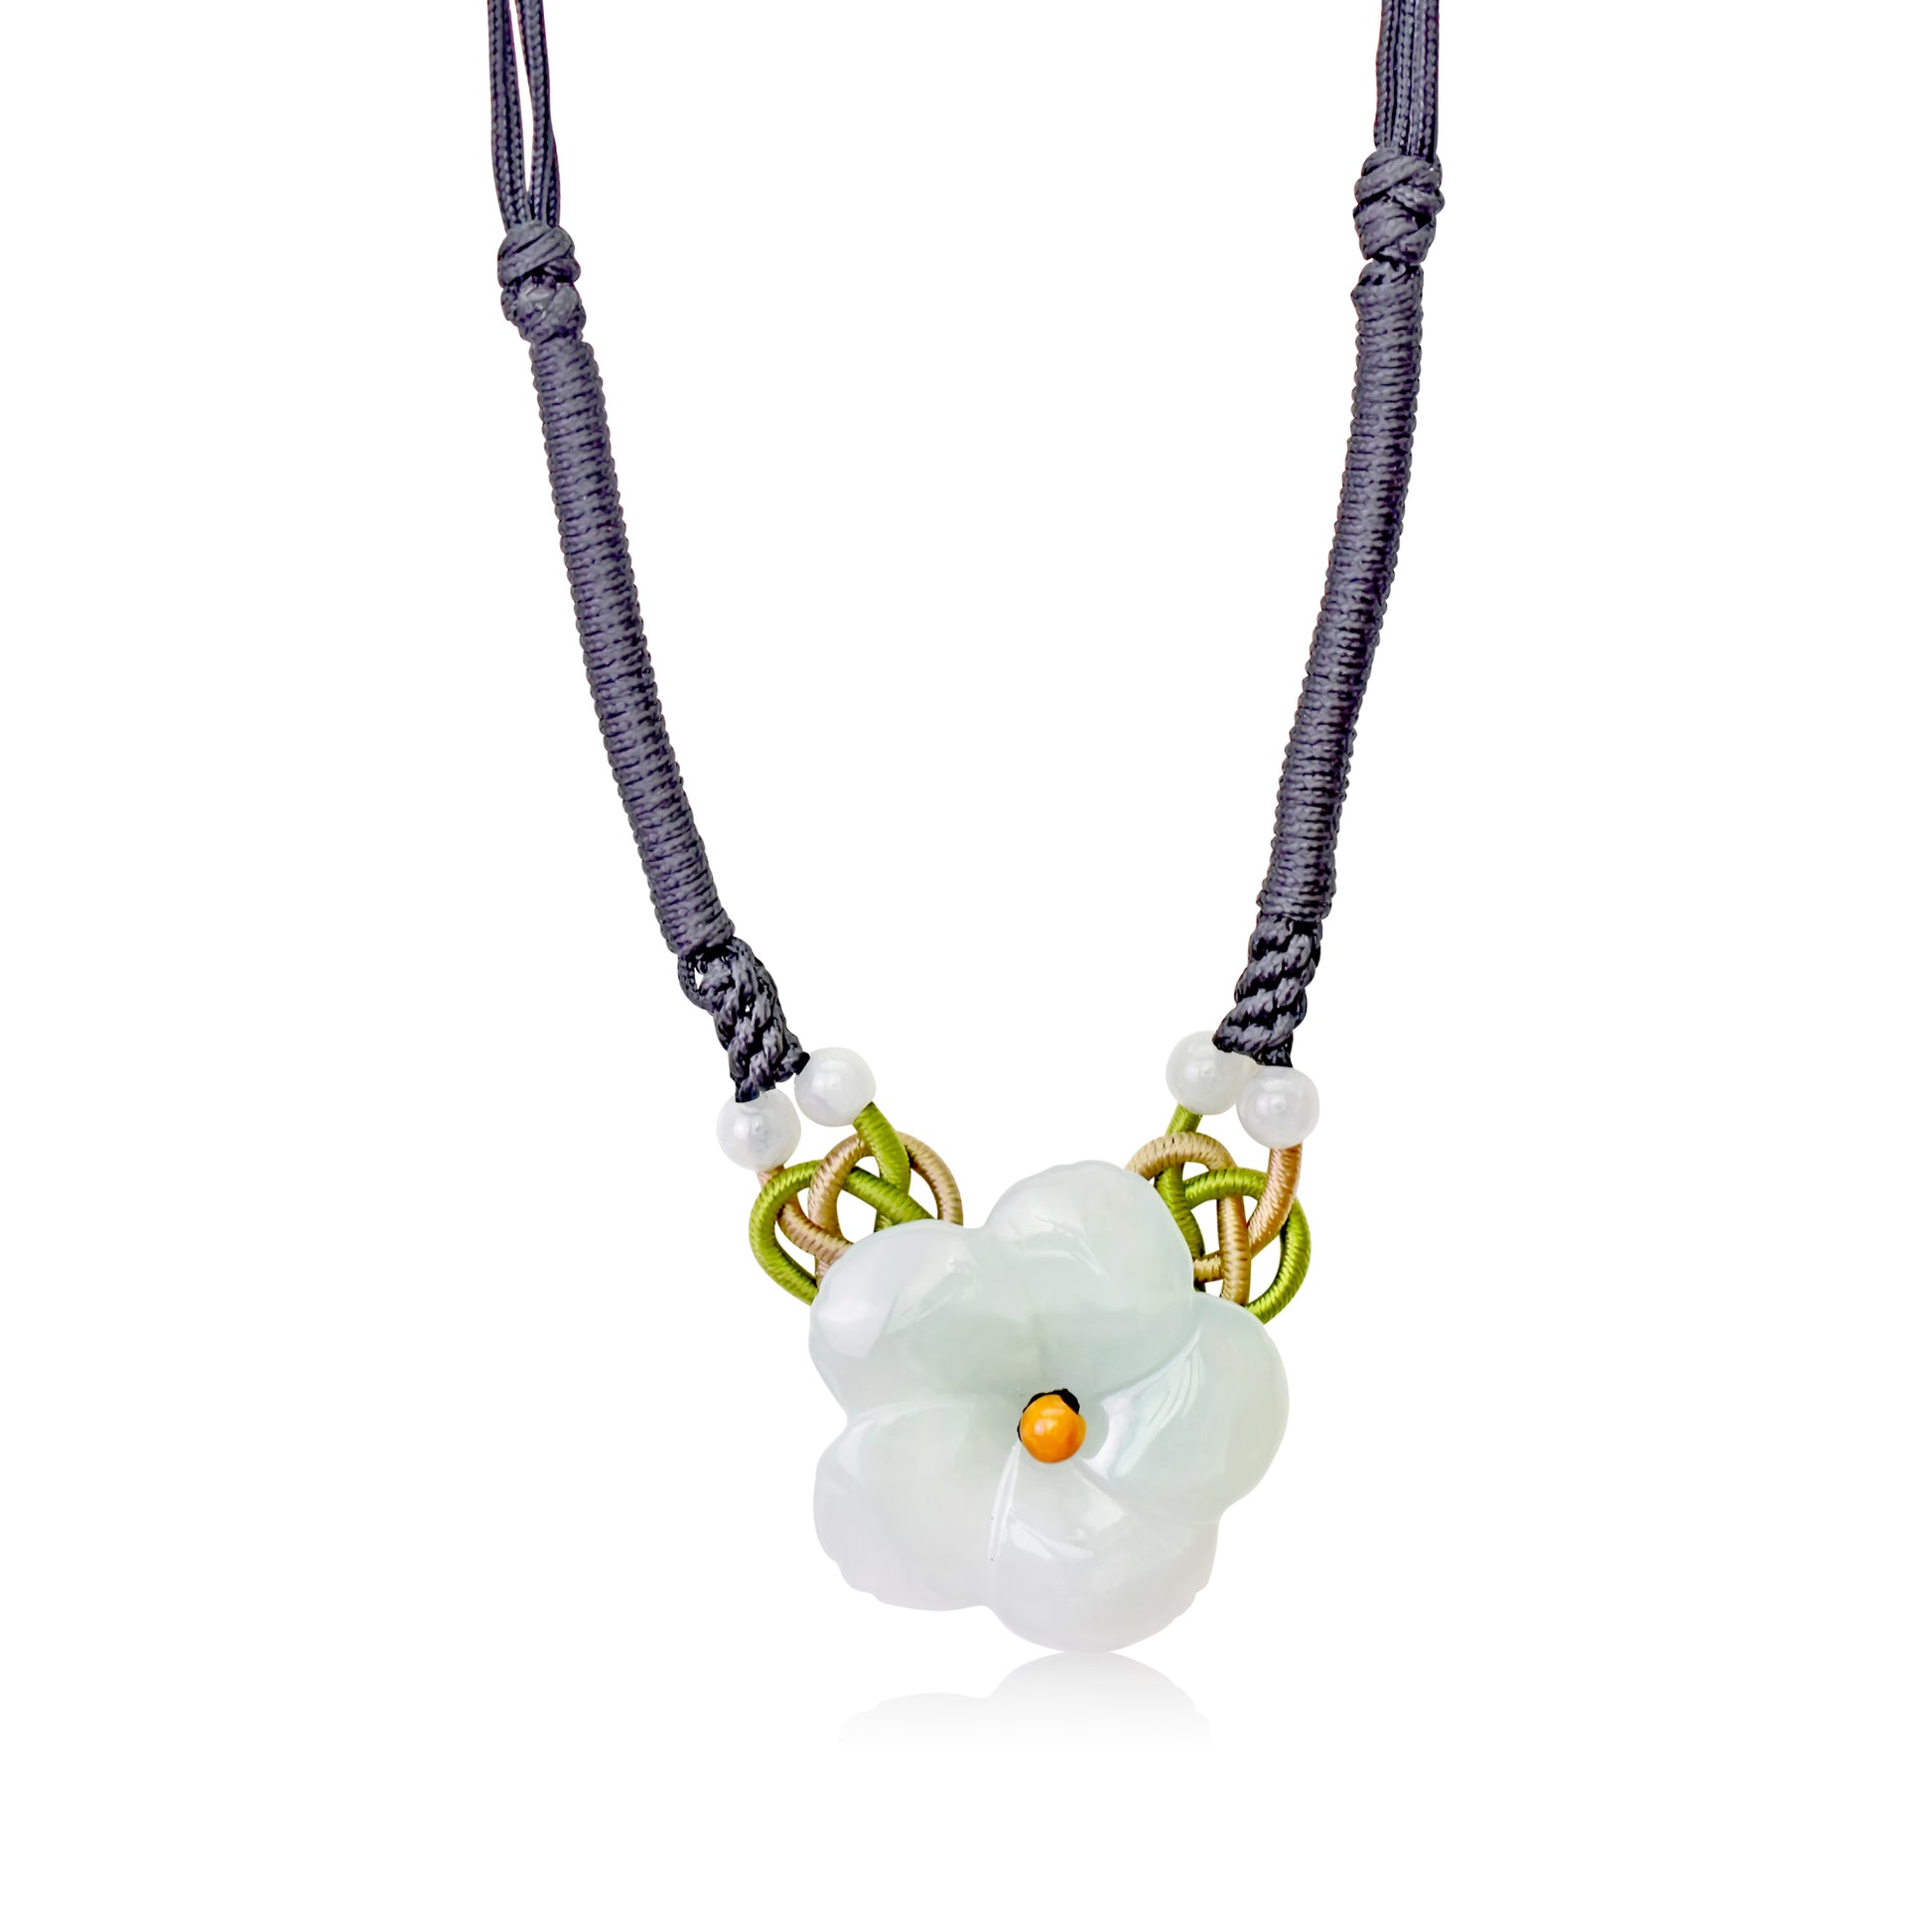 Get the Look You Crave with the Clematis Blossom Jade Necklace with Black Cord